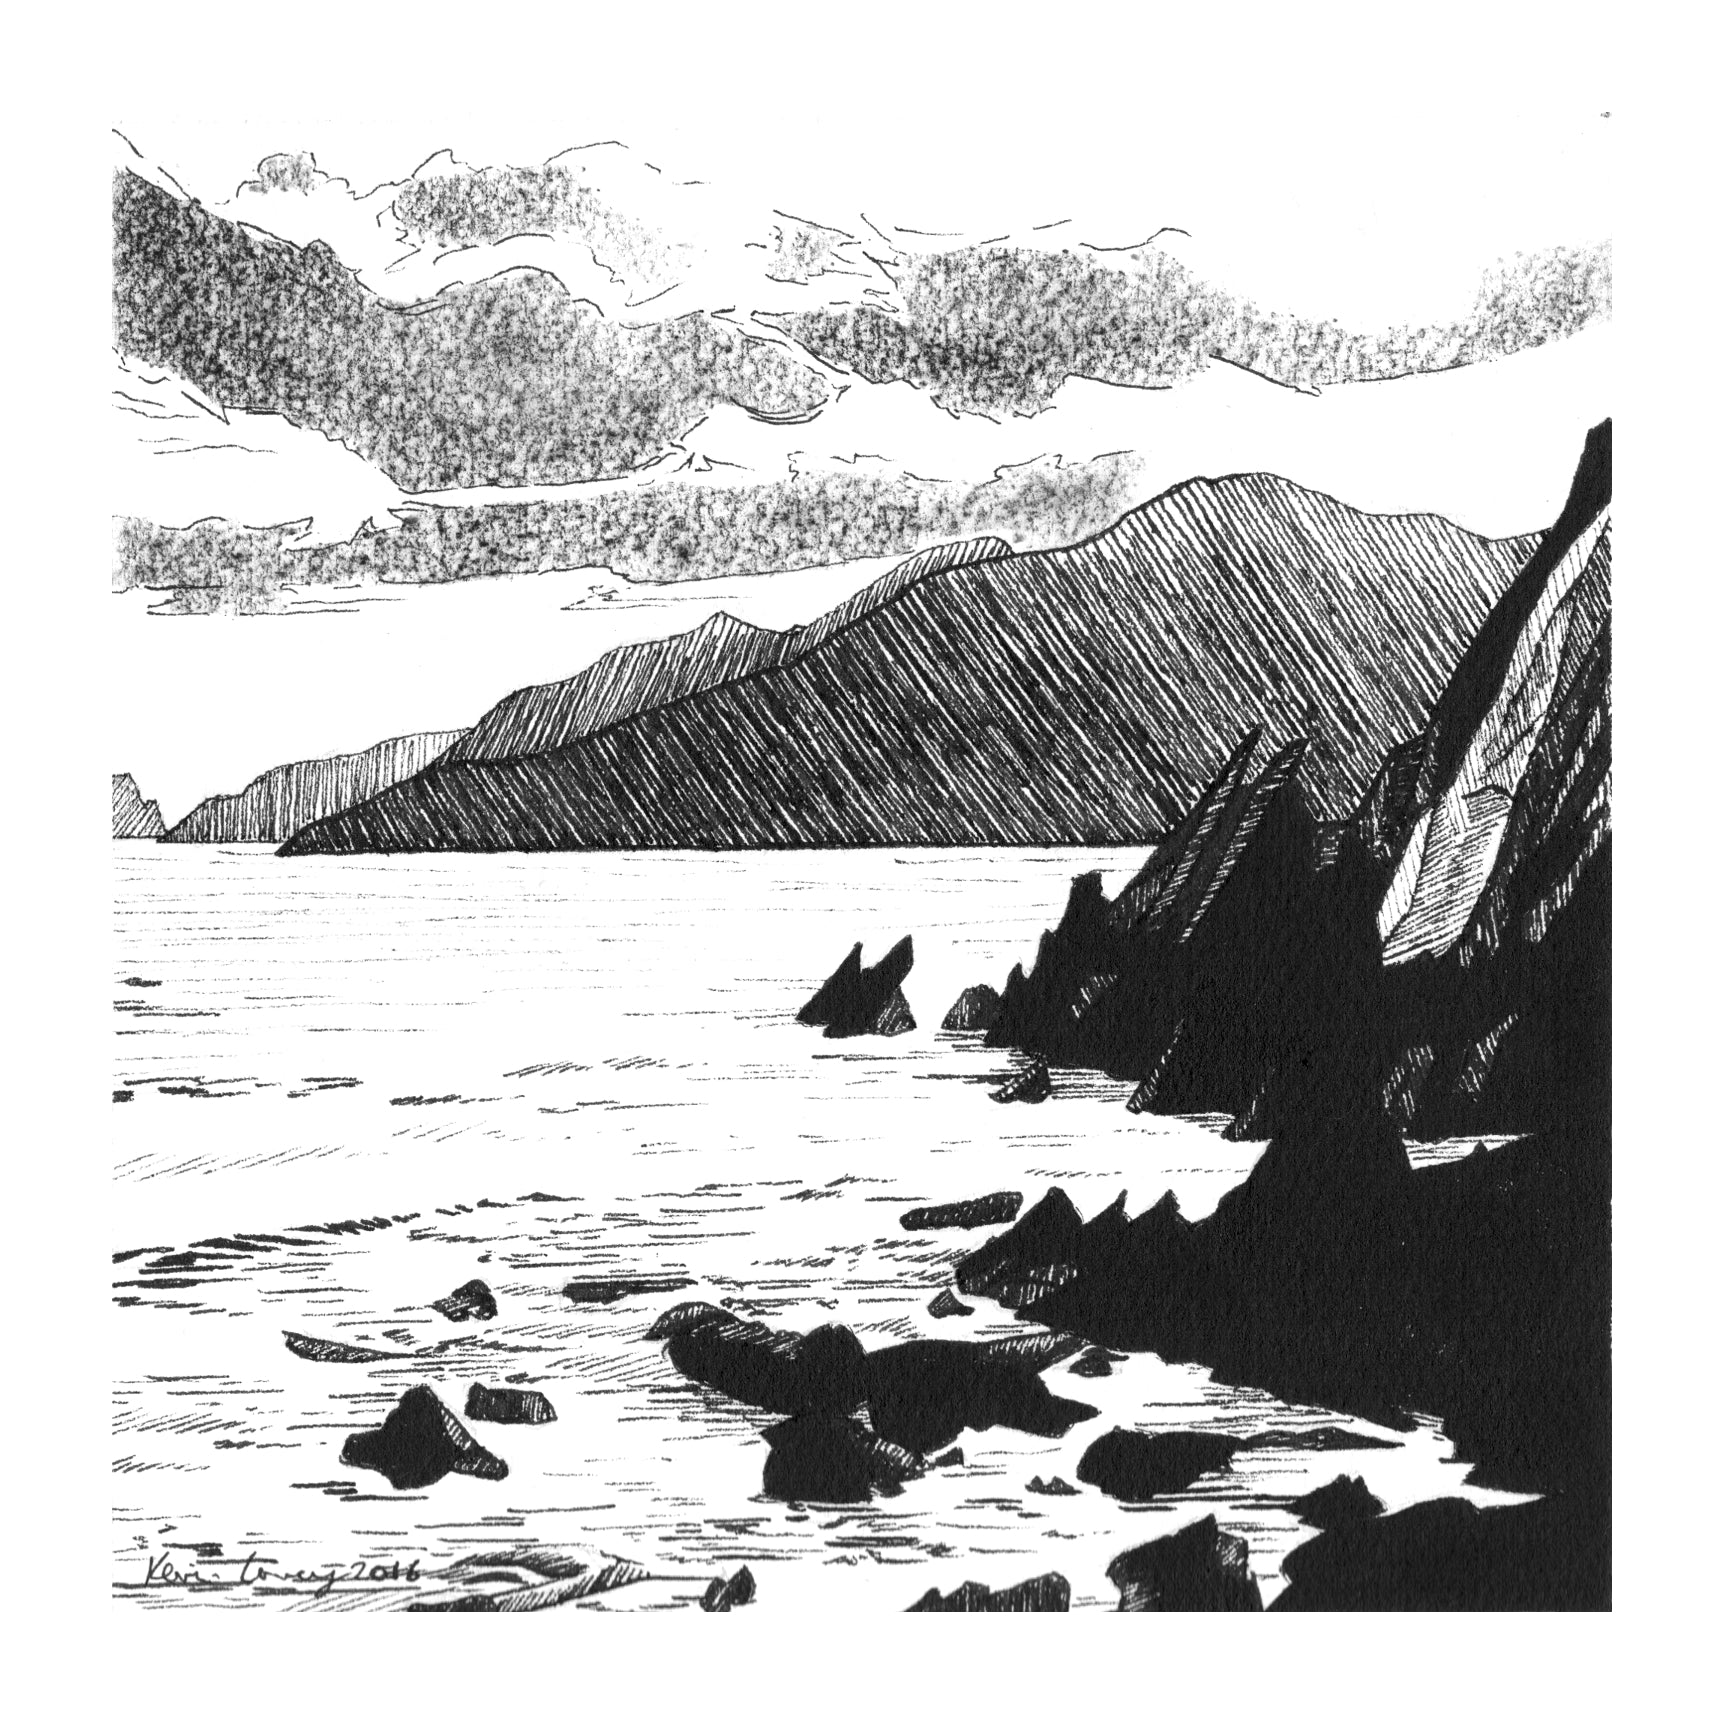 Slea Head - Pack Of 10 Greeting Cards - Contemporary art from Ireland. Paintings & prints by Irish seascape & landscape artist Kevin Lowery.